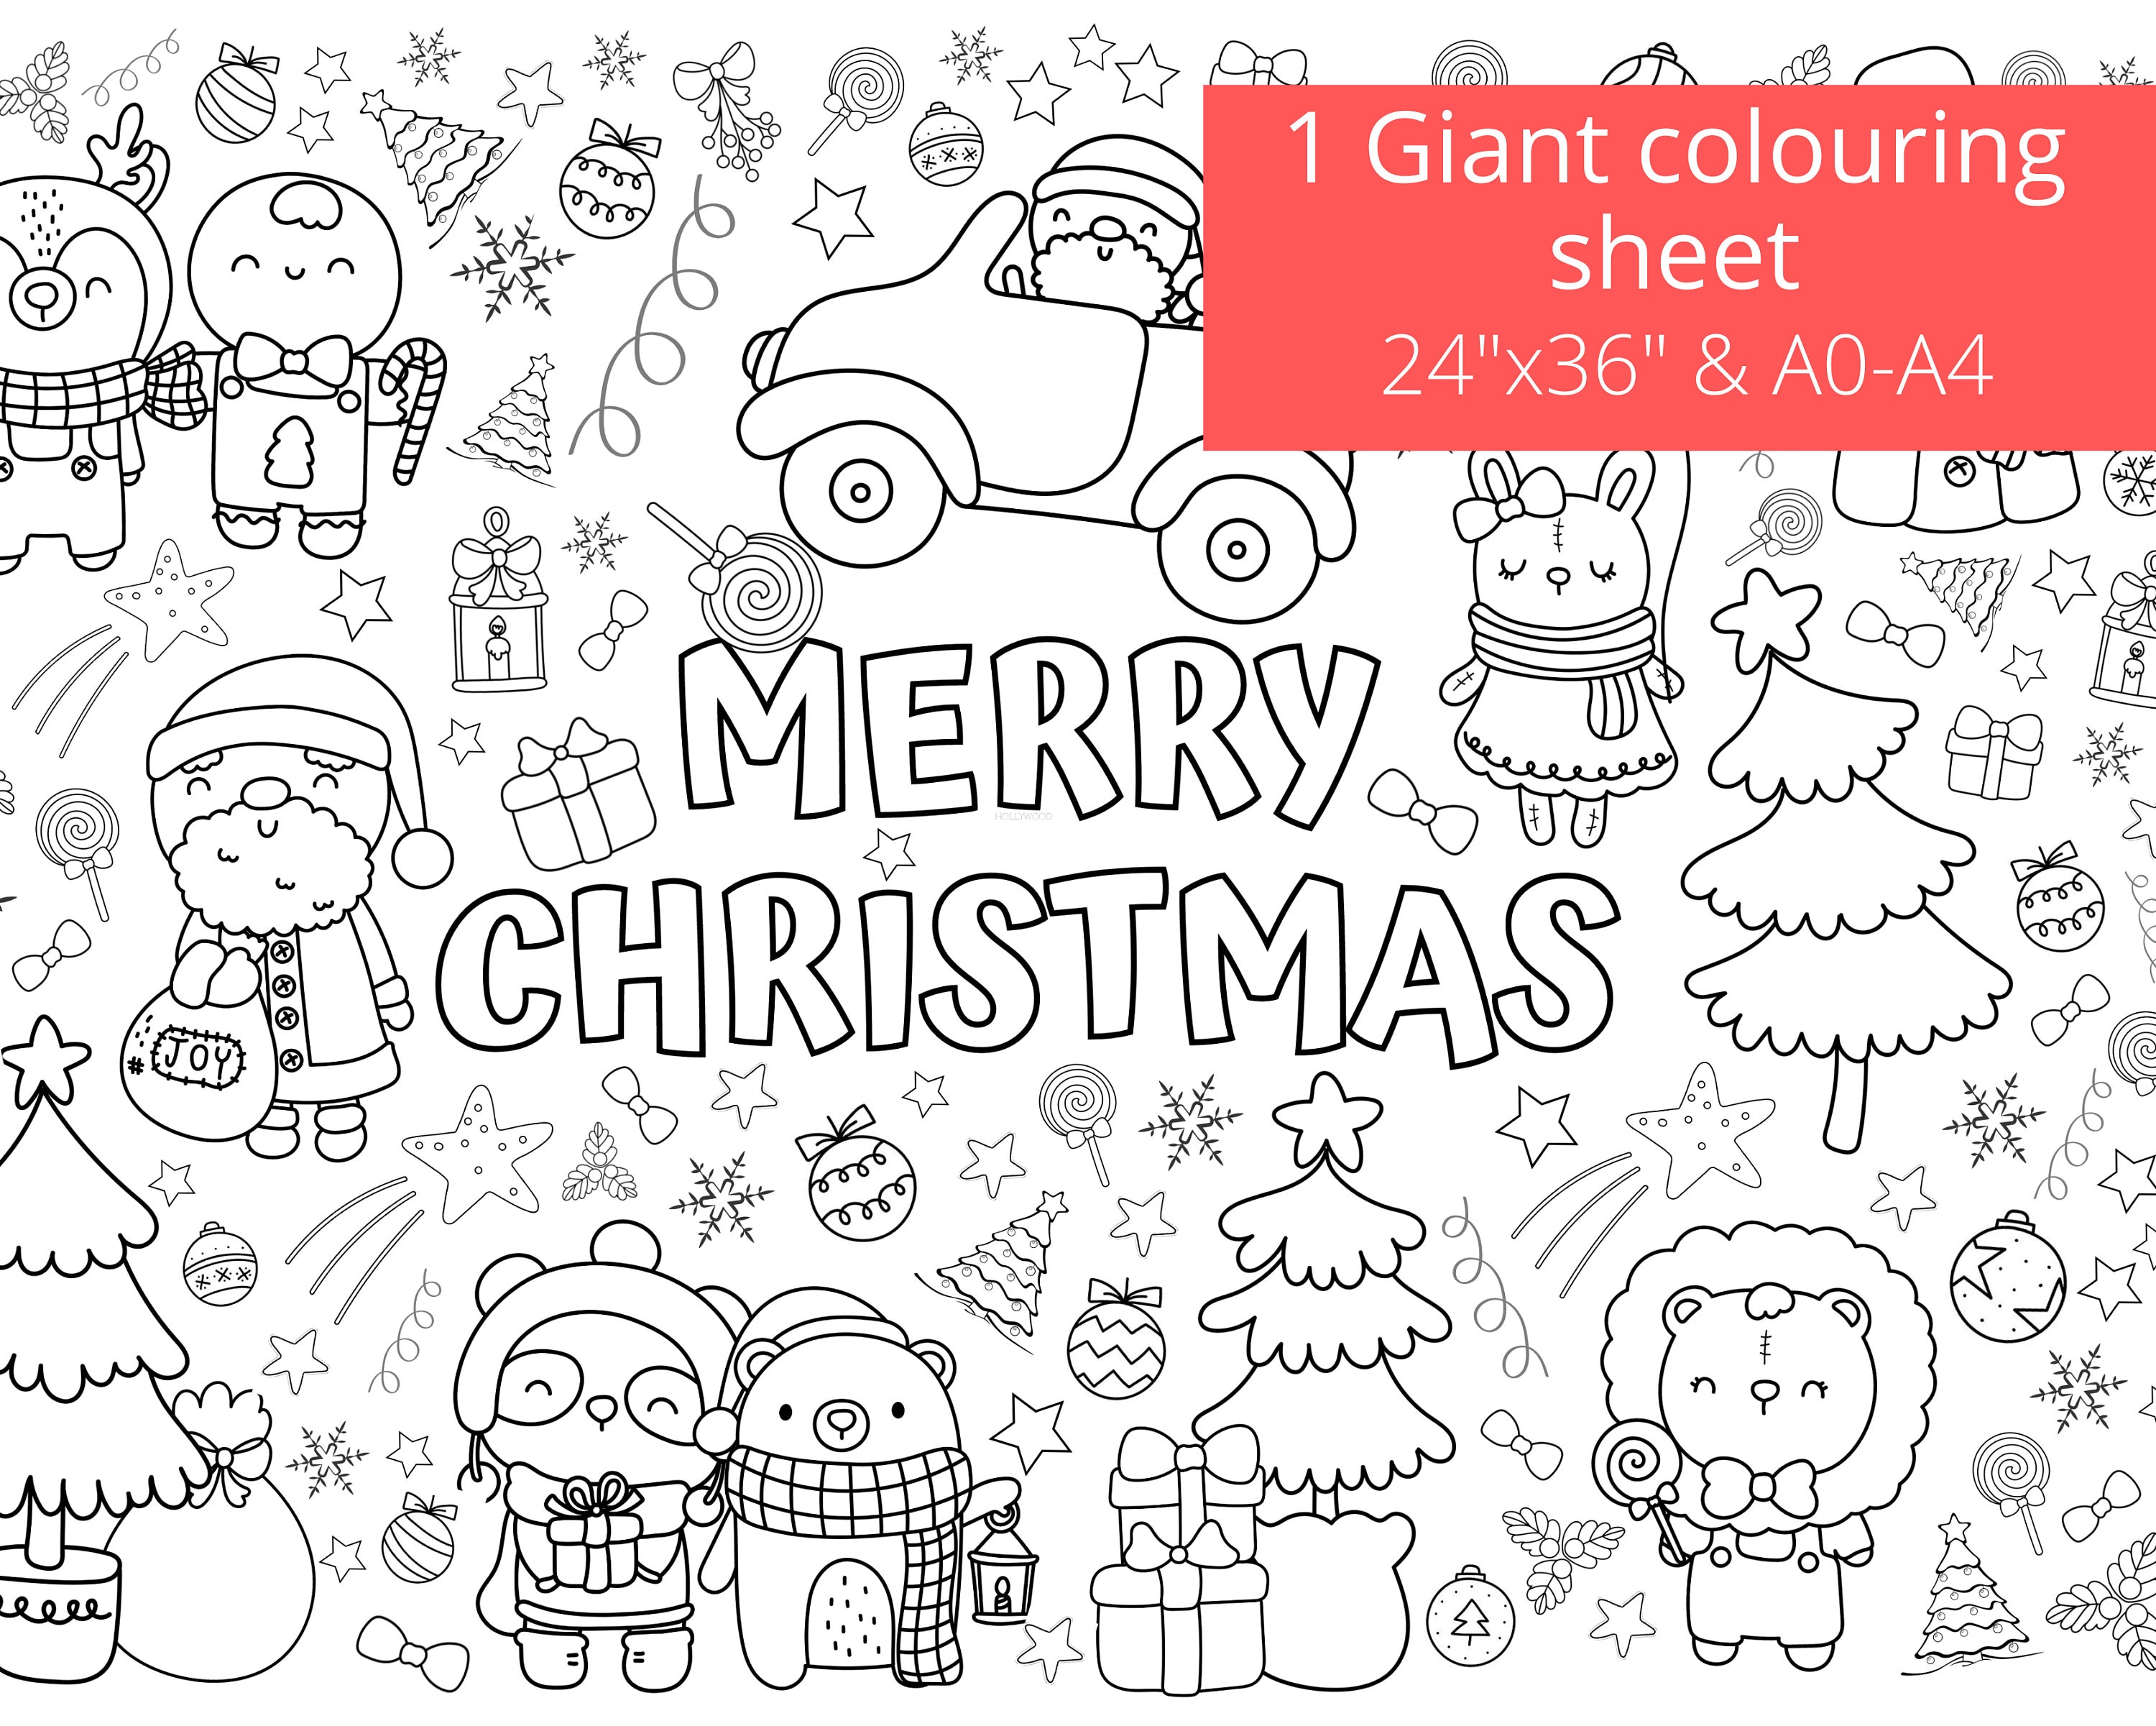 Kid giant christmas coloring page christmas colouring sheet merry christmas coloring page printable instant download a